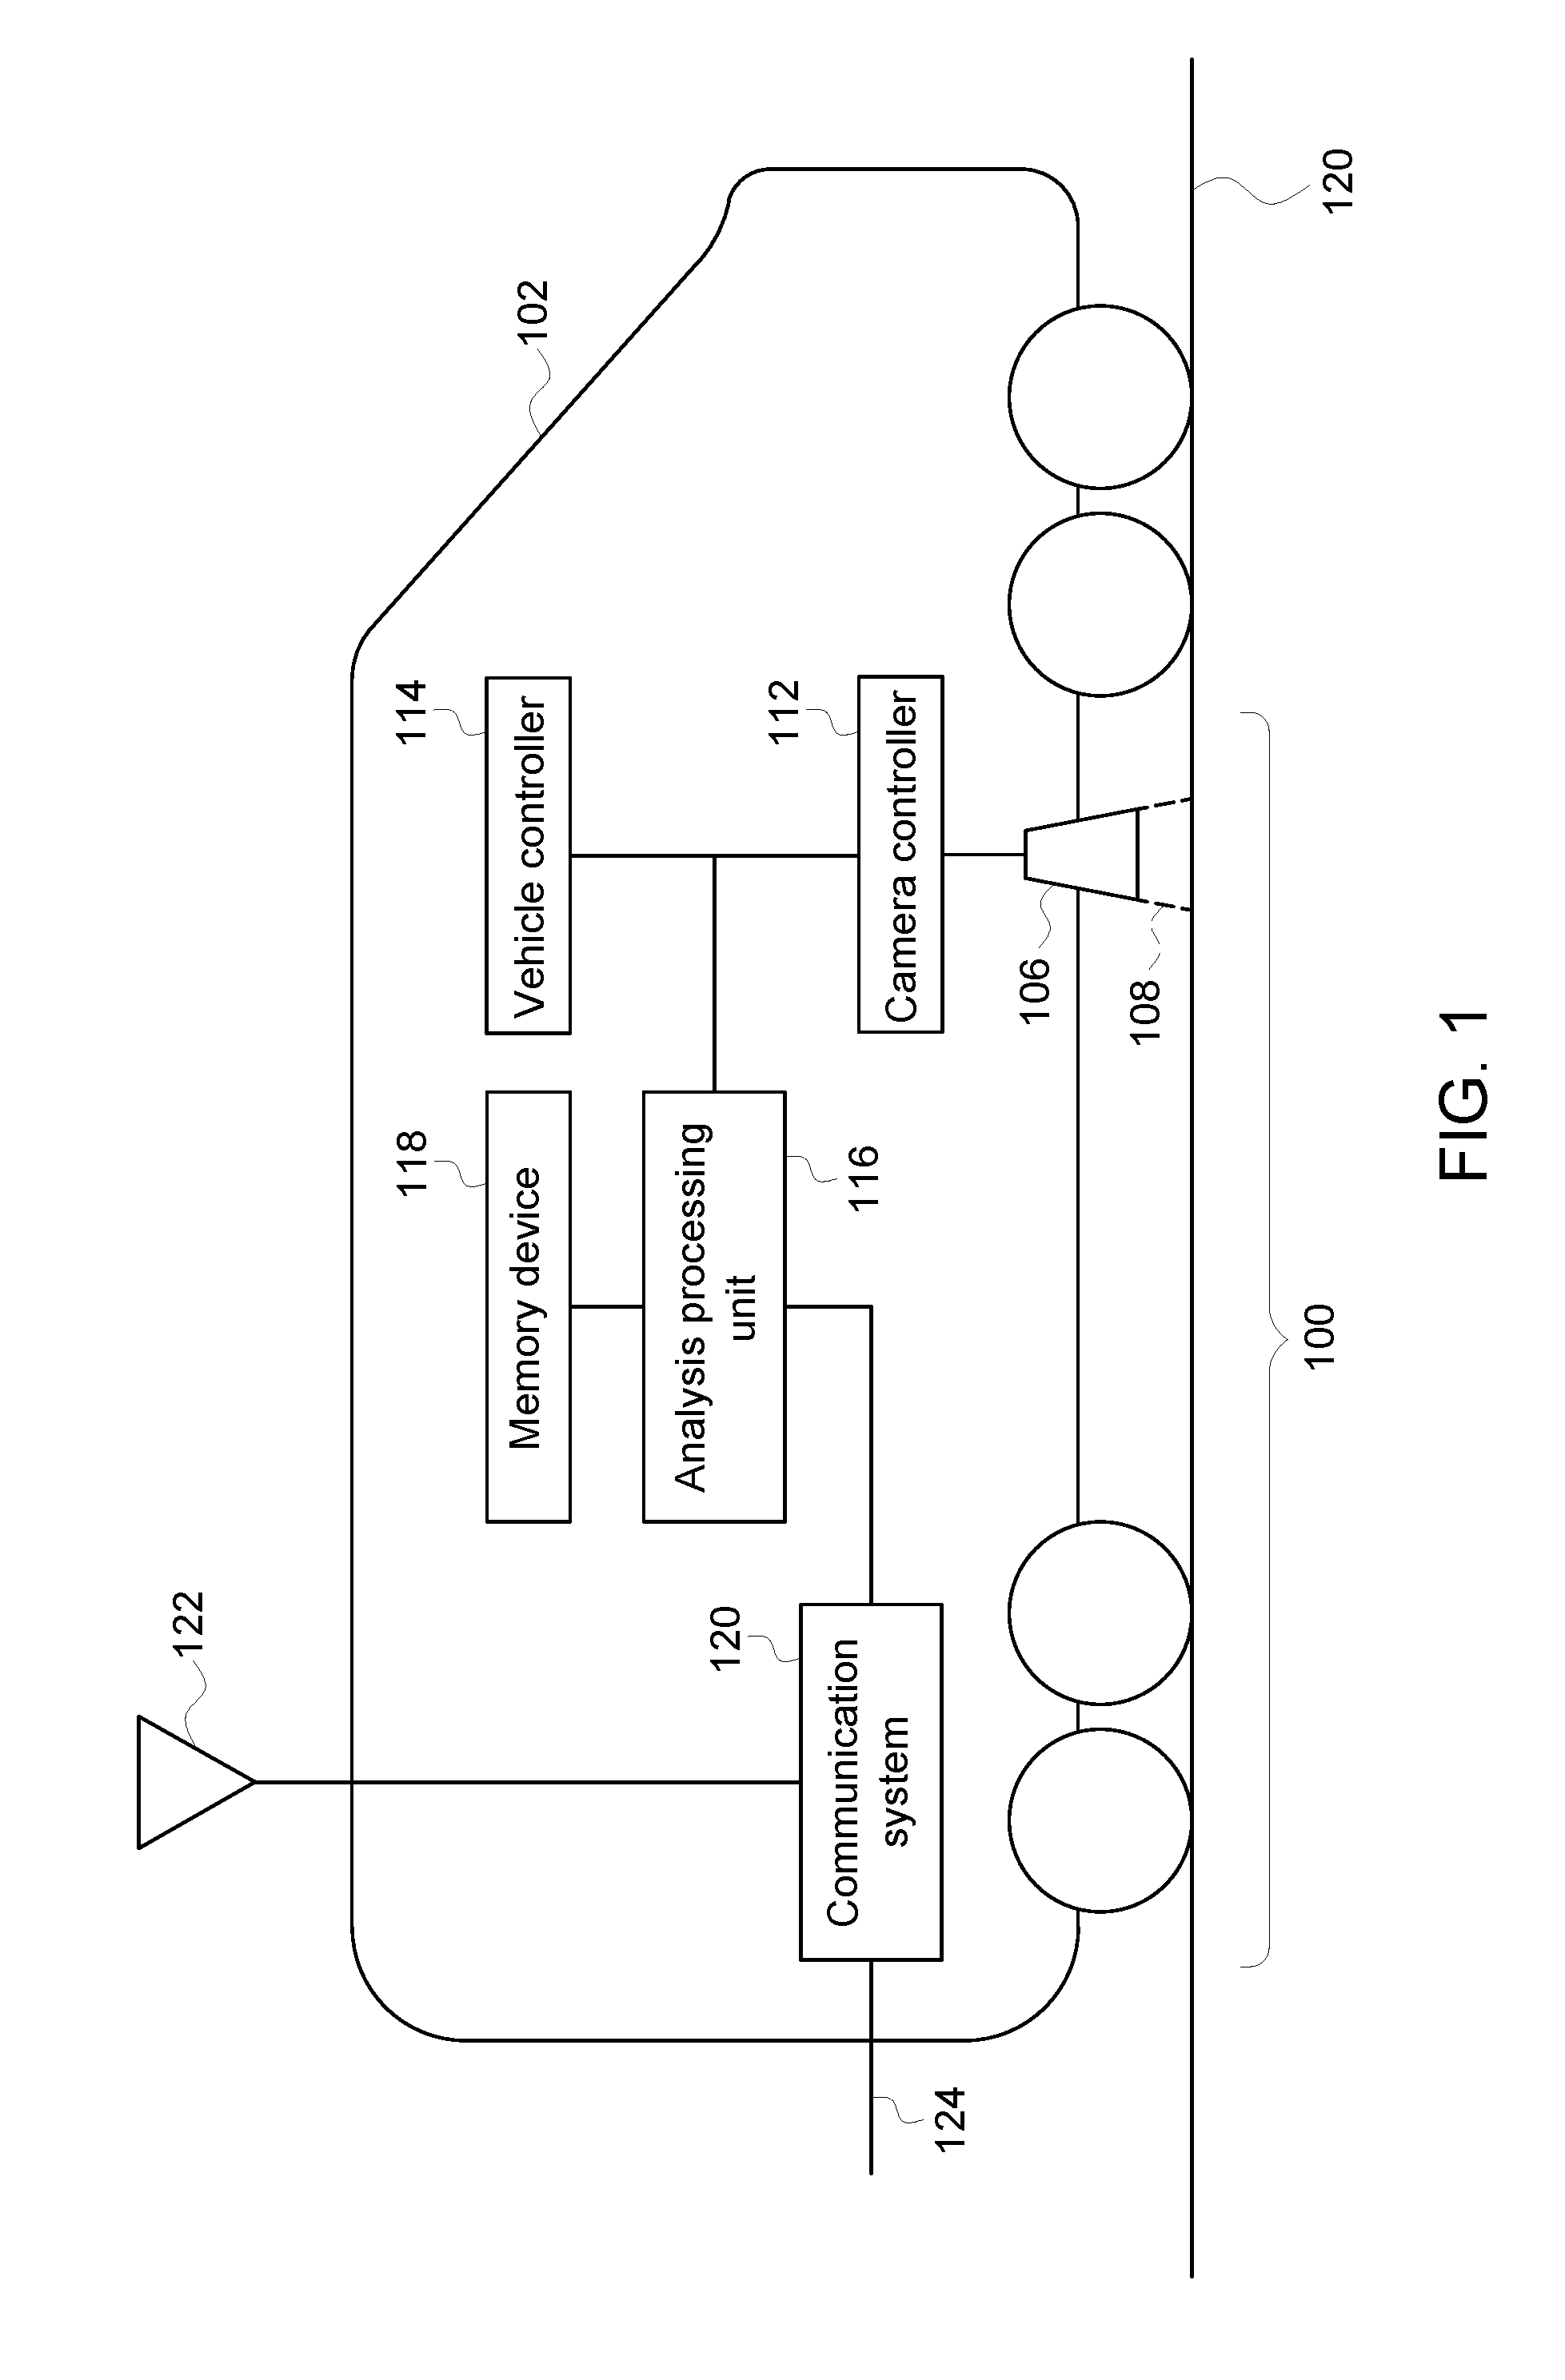 Route examination system and method